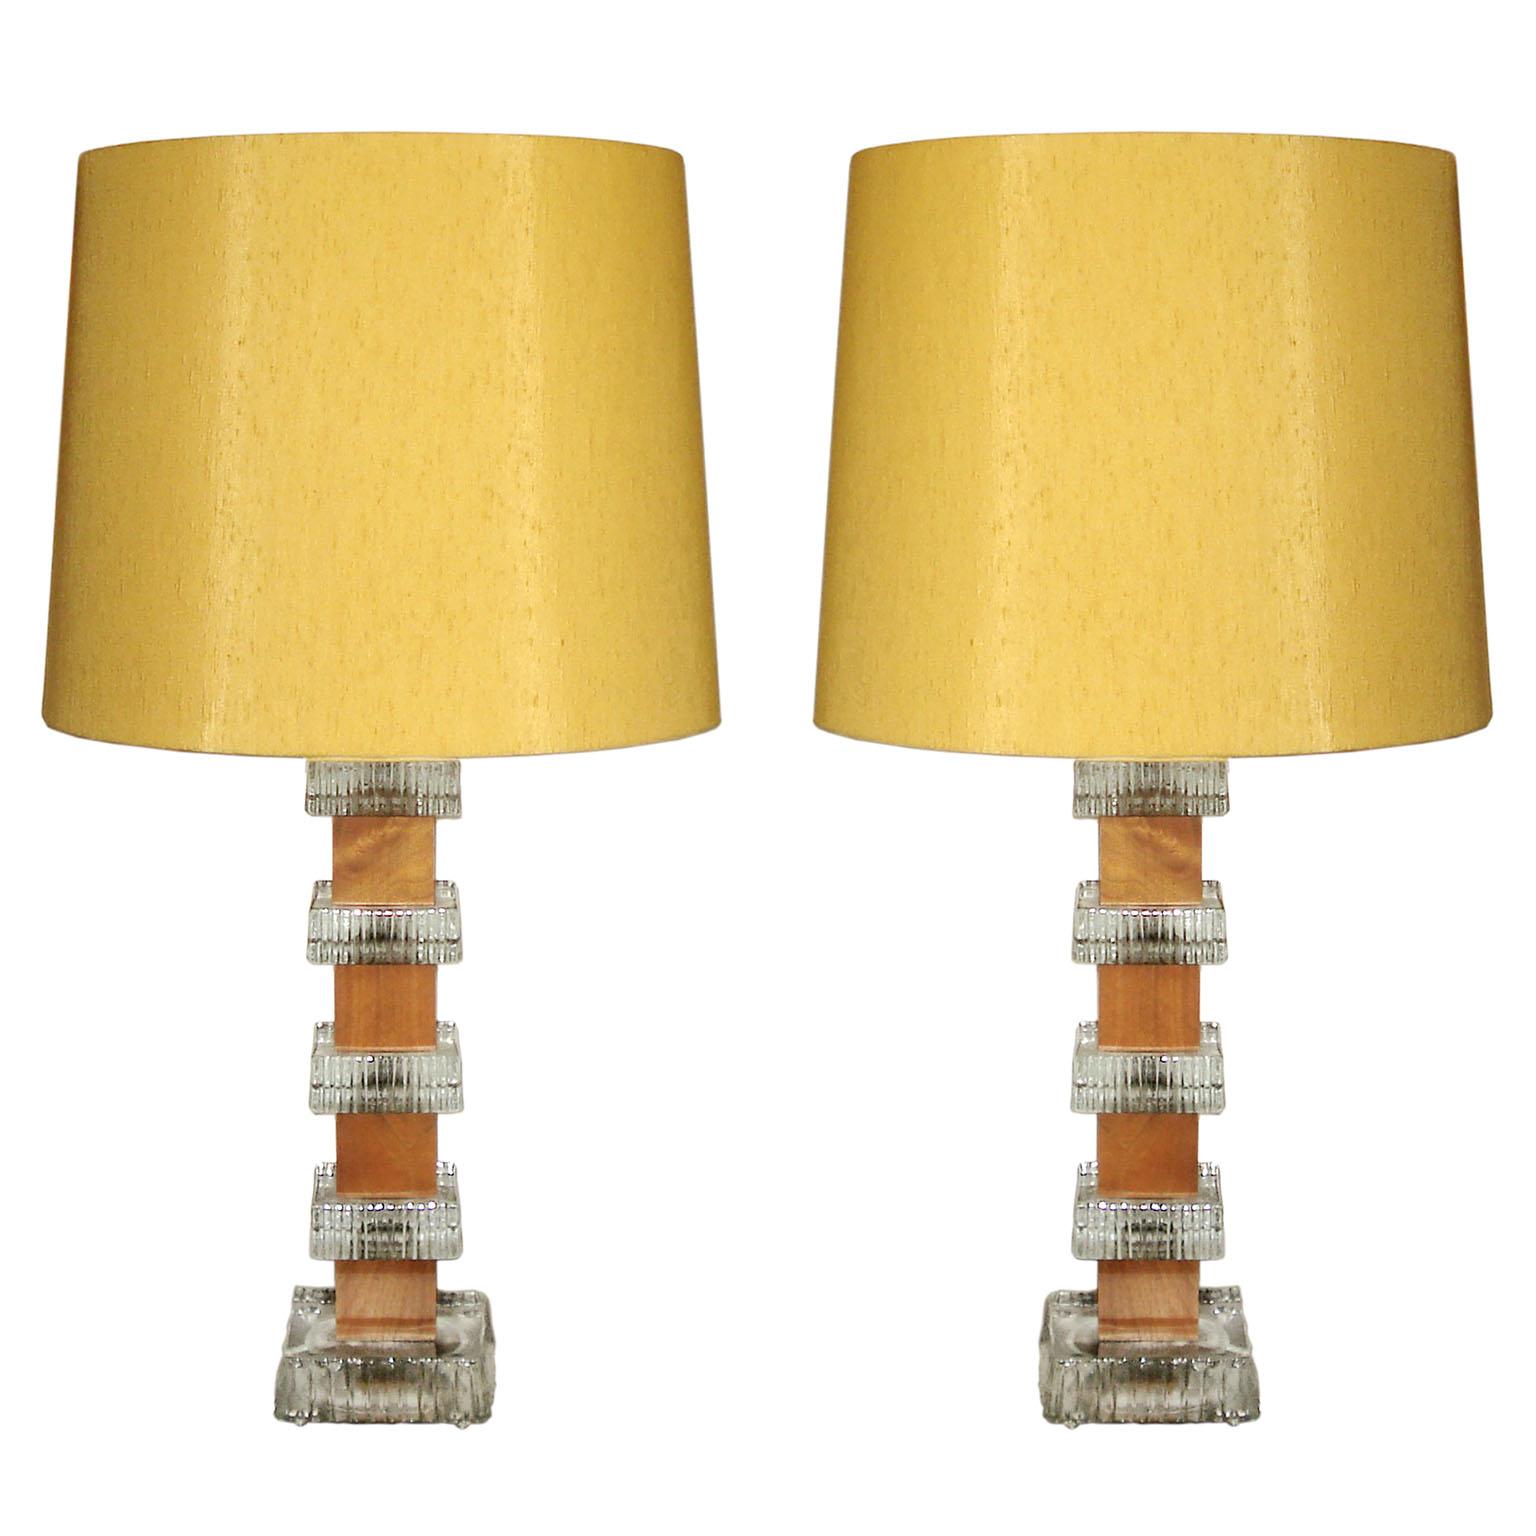 Pair of tall table lamps with assemblage style bases by Ateljé Glas & Trä, with molded glass squares ridged on sides, alternating with blocks of teak, Sweden, 1960s
Original lampshades in silk fabric (shantung look) available, one of them shows some